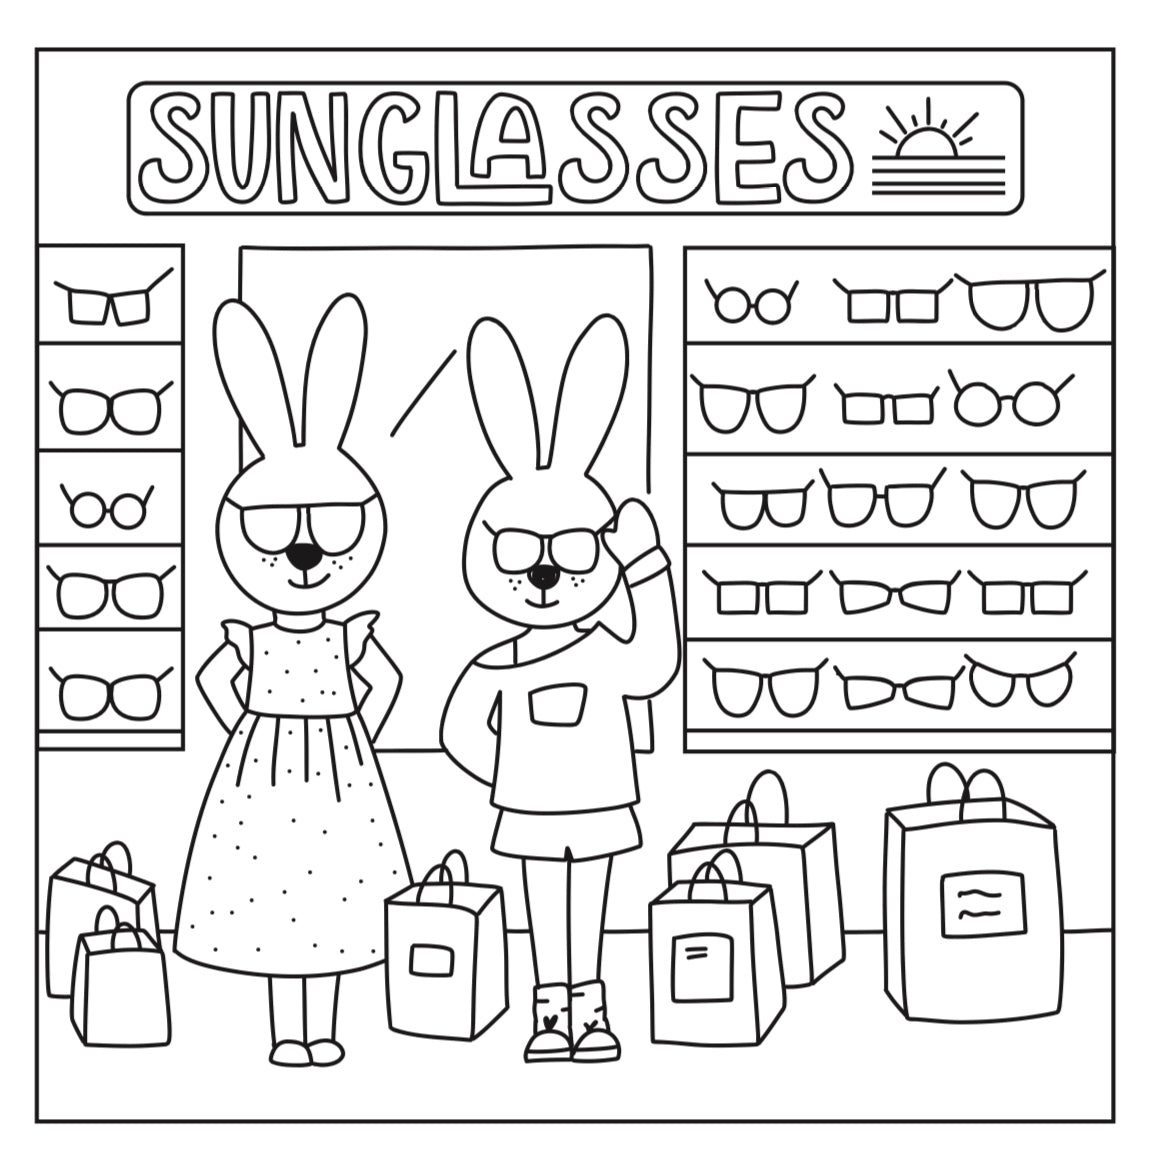 Free! The Dogwoods “Sunglasses” Coloring Pages